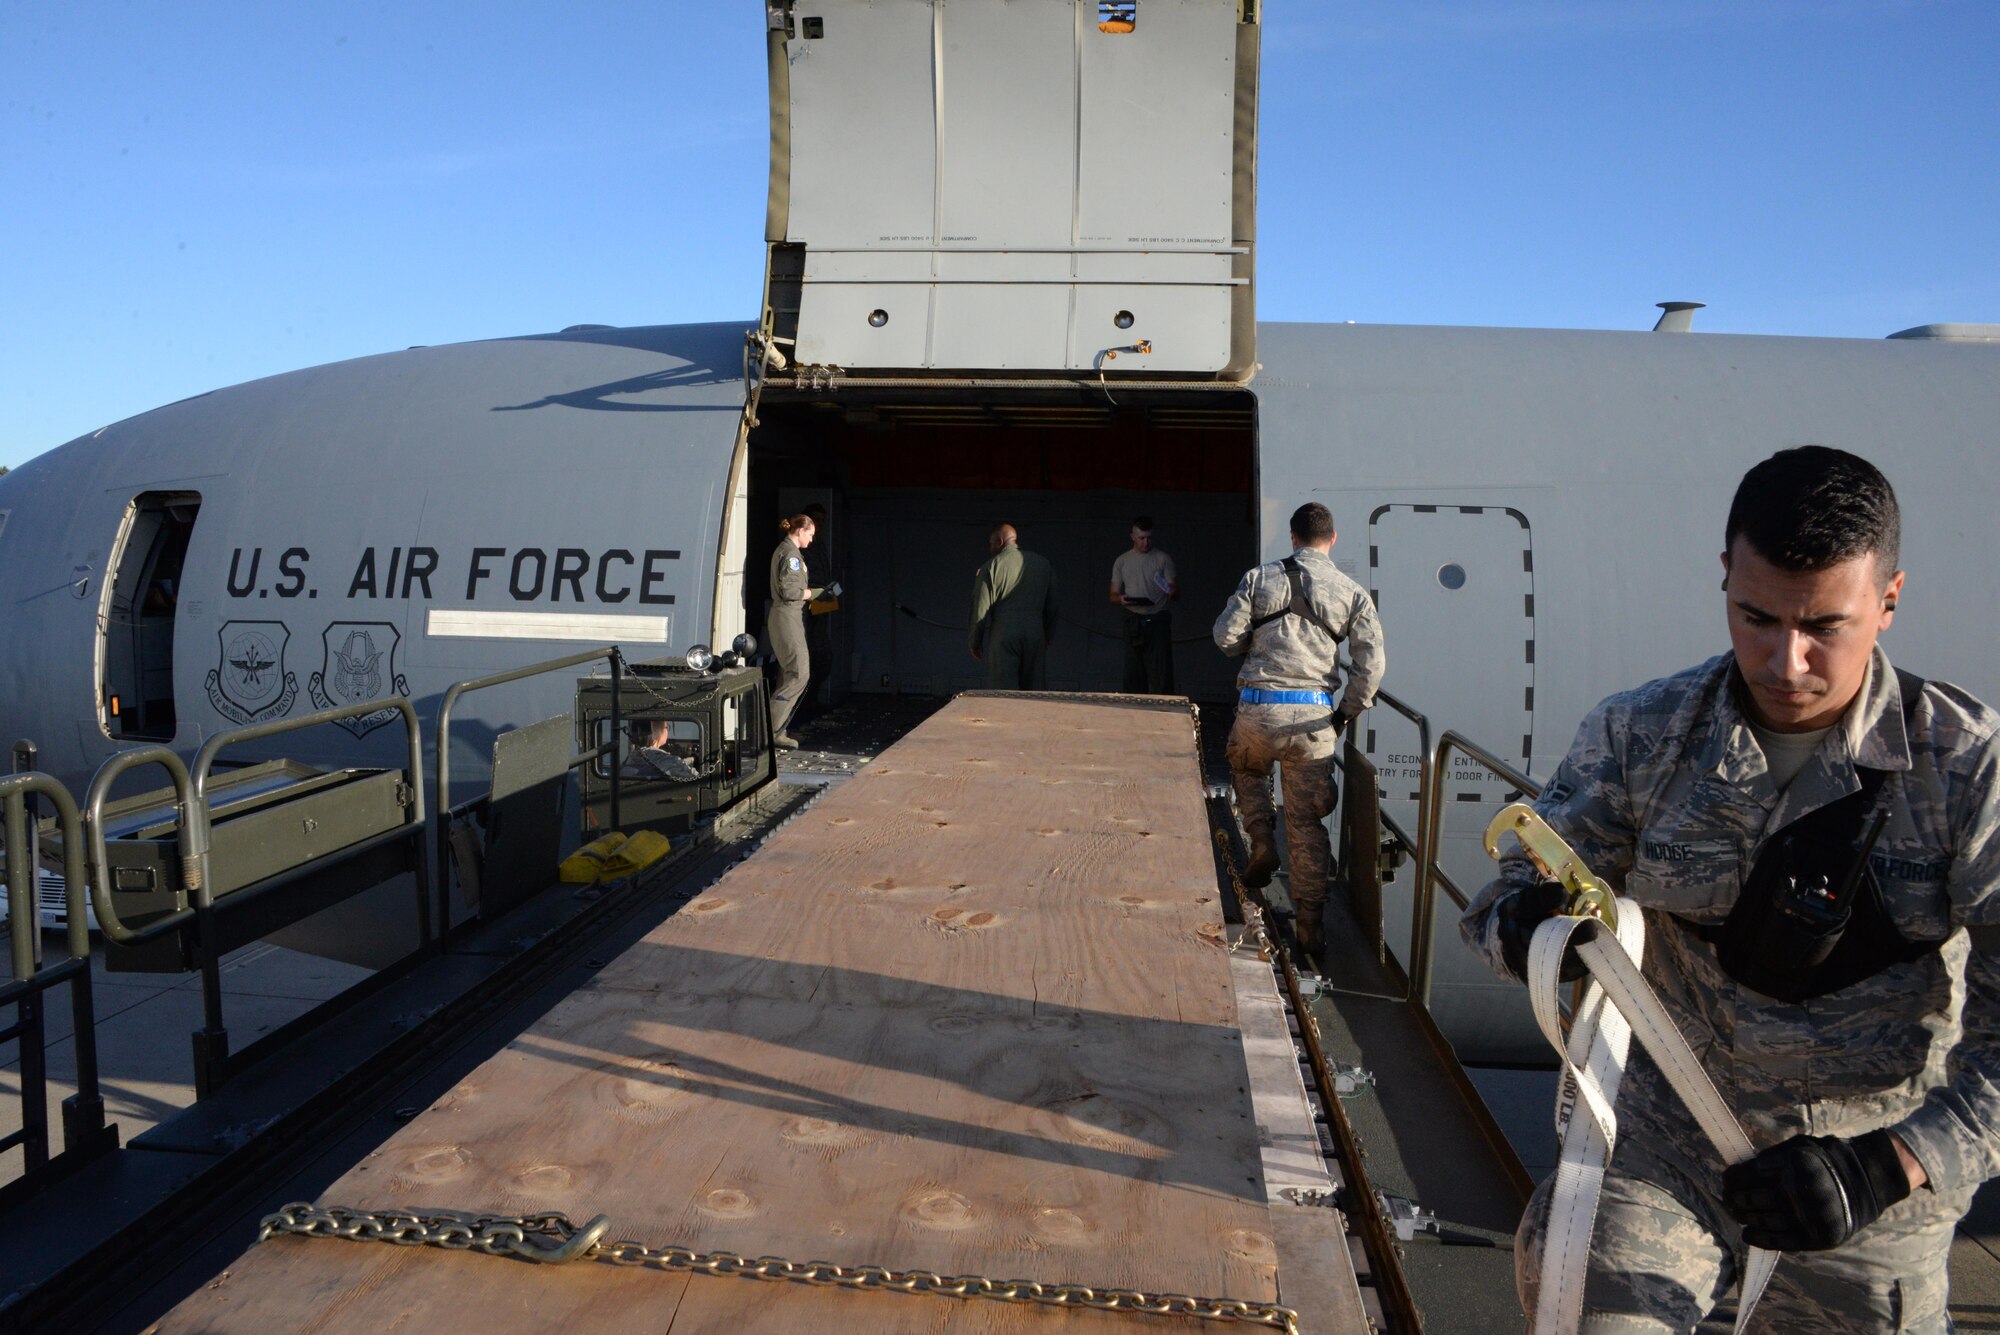 Airman 1st Class James Hodge III, 60th Aerial Port Squadron, prepares to load a pallet onto a KC-10 Extender at Travis Air Force Base, Calif., June 17, 2017. Hodge helped load more than 15,000 pounds of cargo prior to a flight to Joint Base Pearl Harbor-Hickam, Hawaii. (U.S. Air Force photo by Tech. Sgt. James Hodgman)